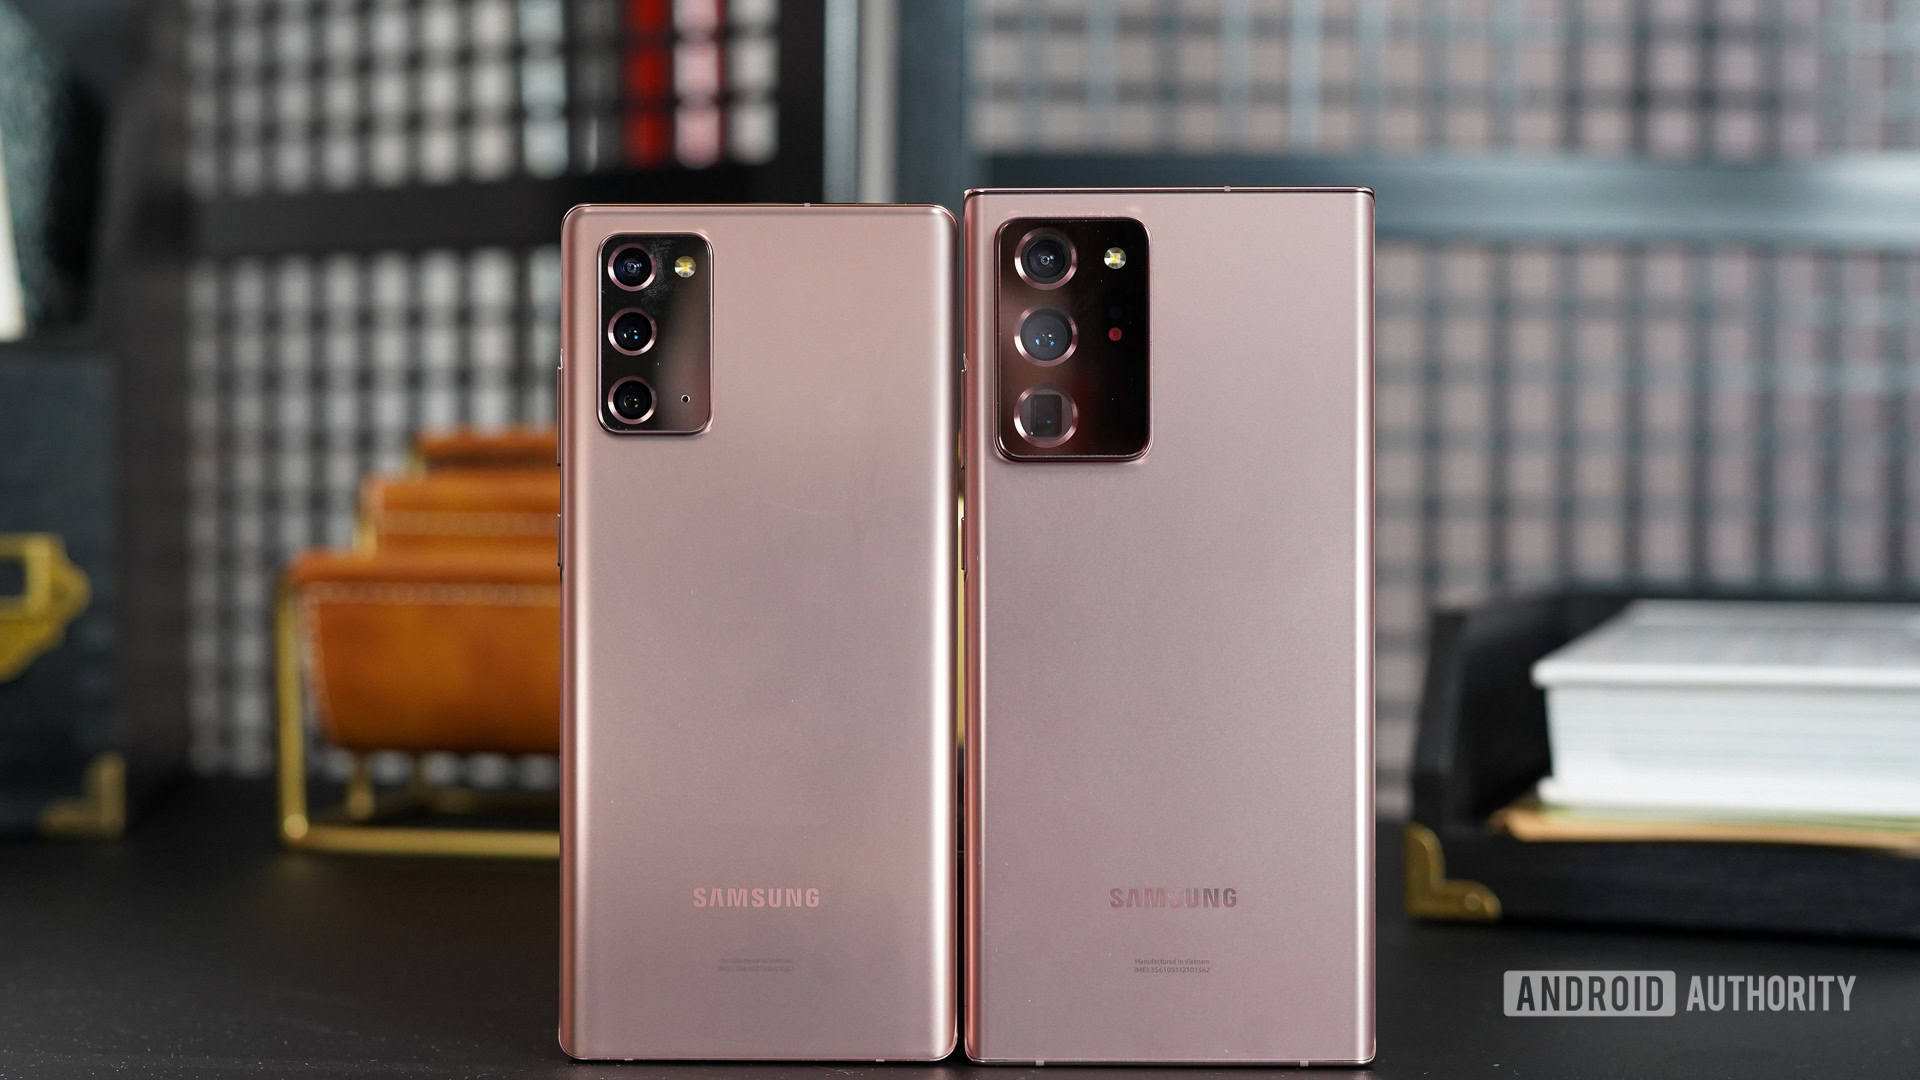 https://www.androidauthority.com/wp-content/uploads/2020/08/Samsung-Galaxy-Note-20-and-Note-20-Ultra-rear-panels.jpg